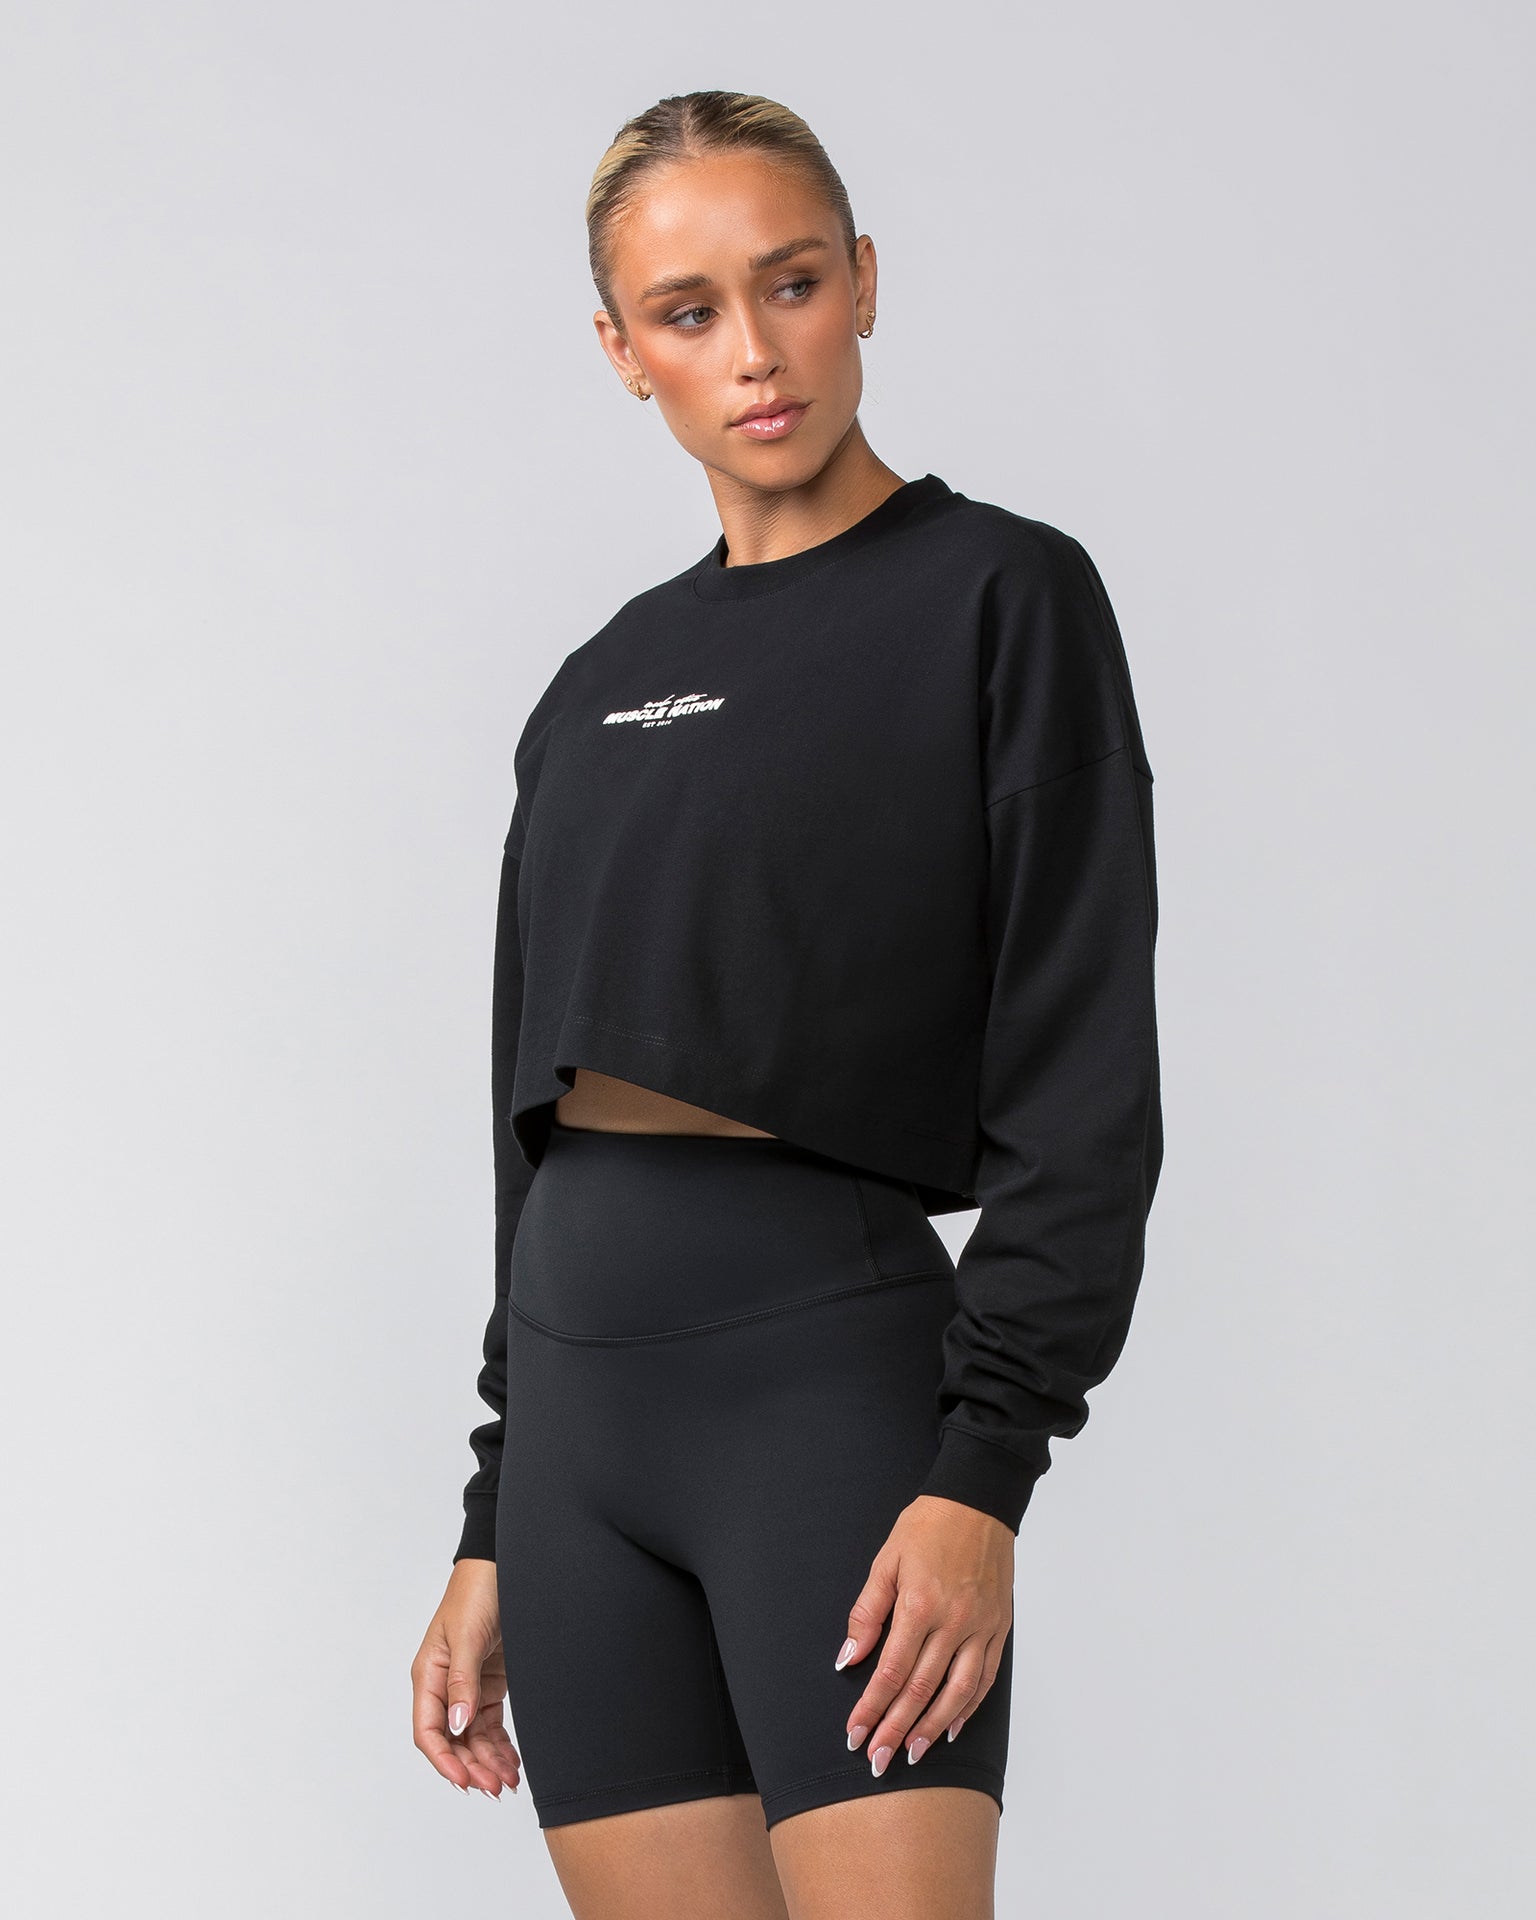 Muscle Nation Long Sleeve Tops Pace Cropped Long Sleeve Tee - Black